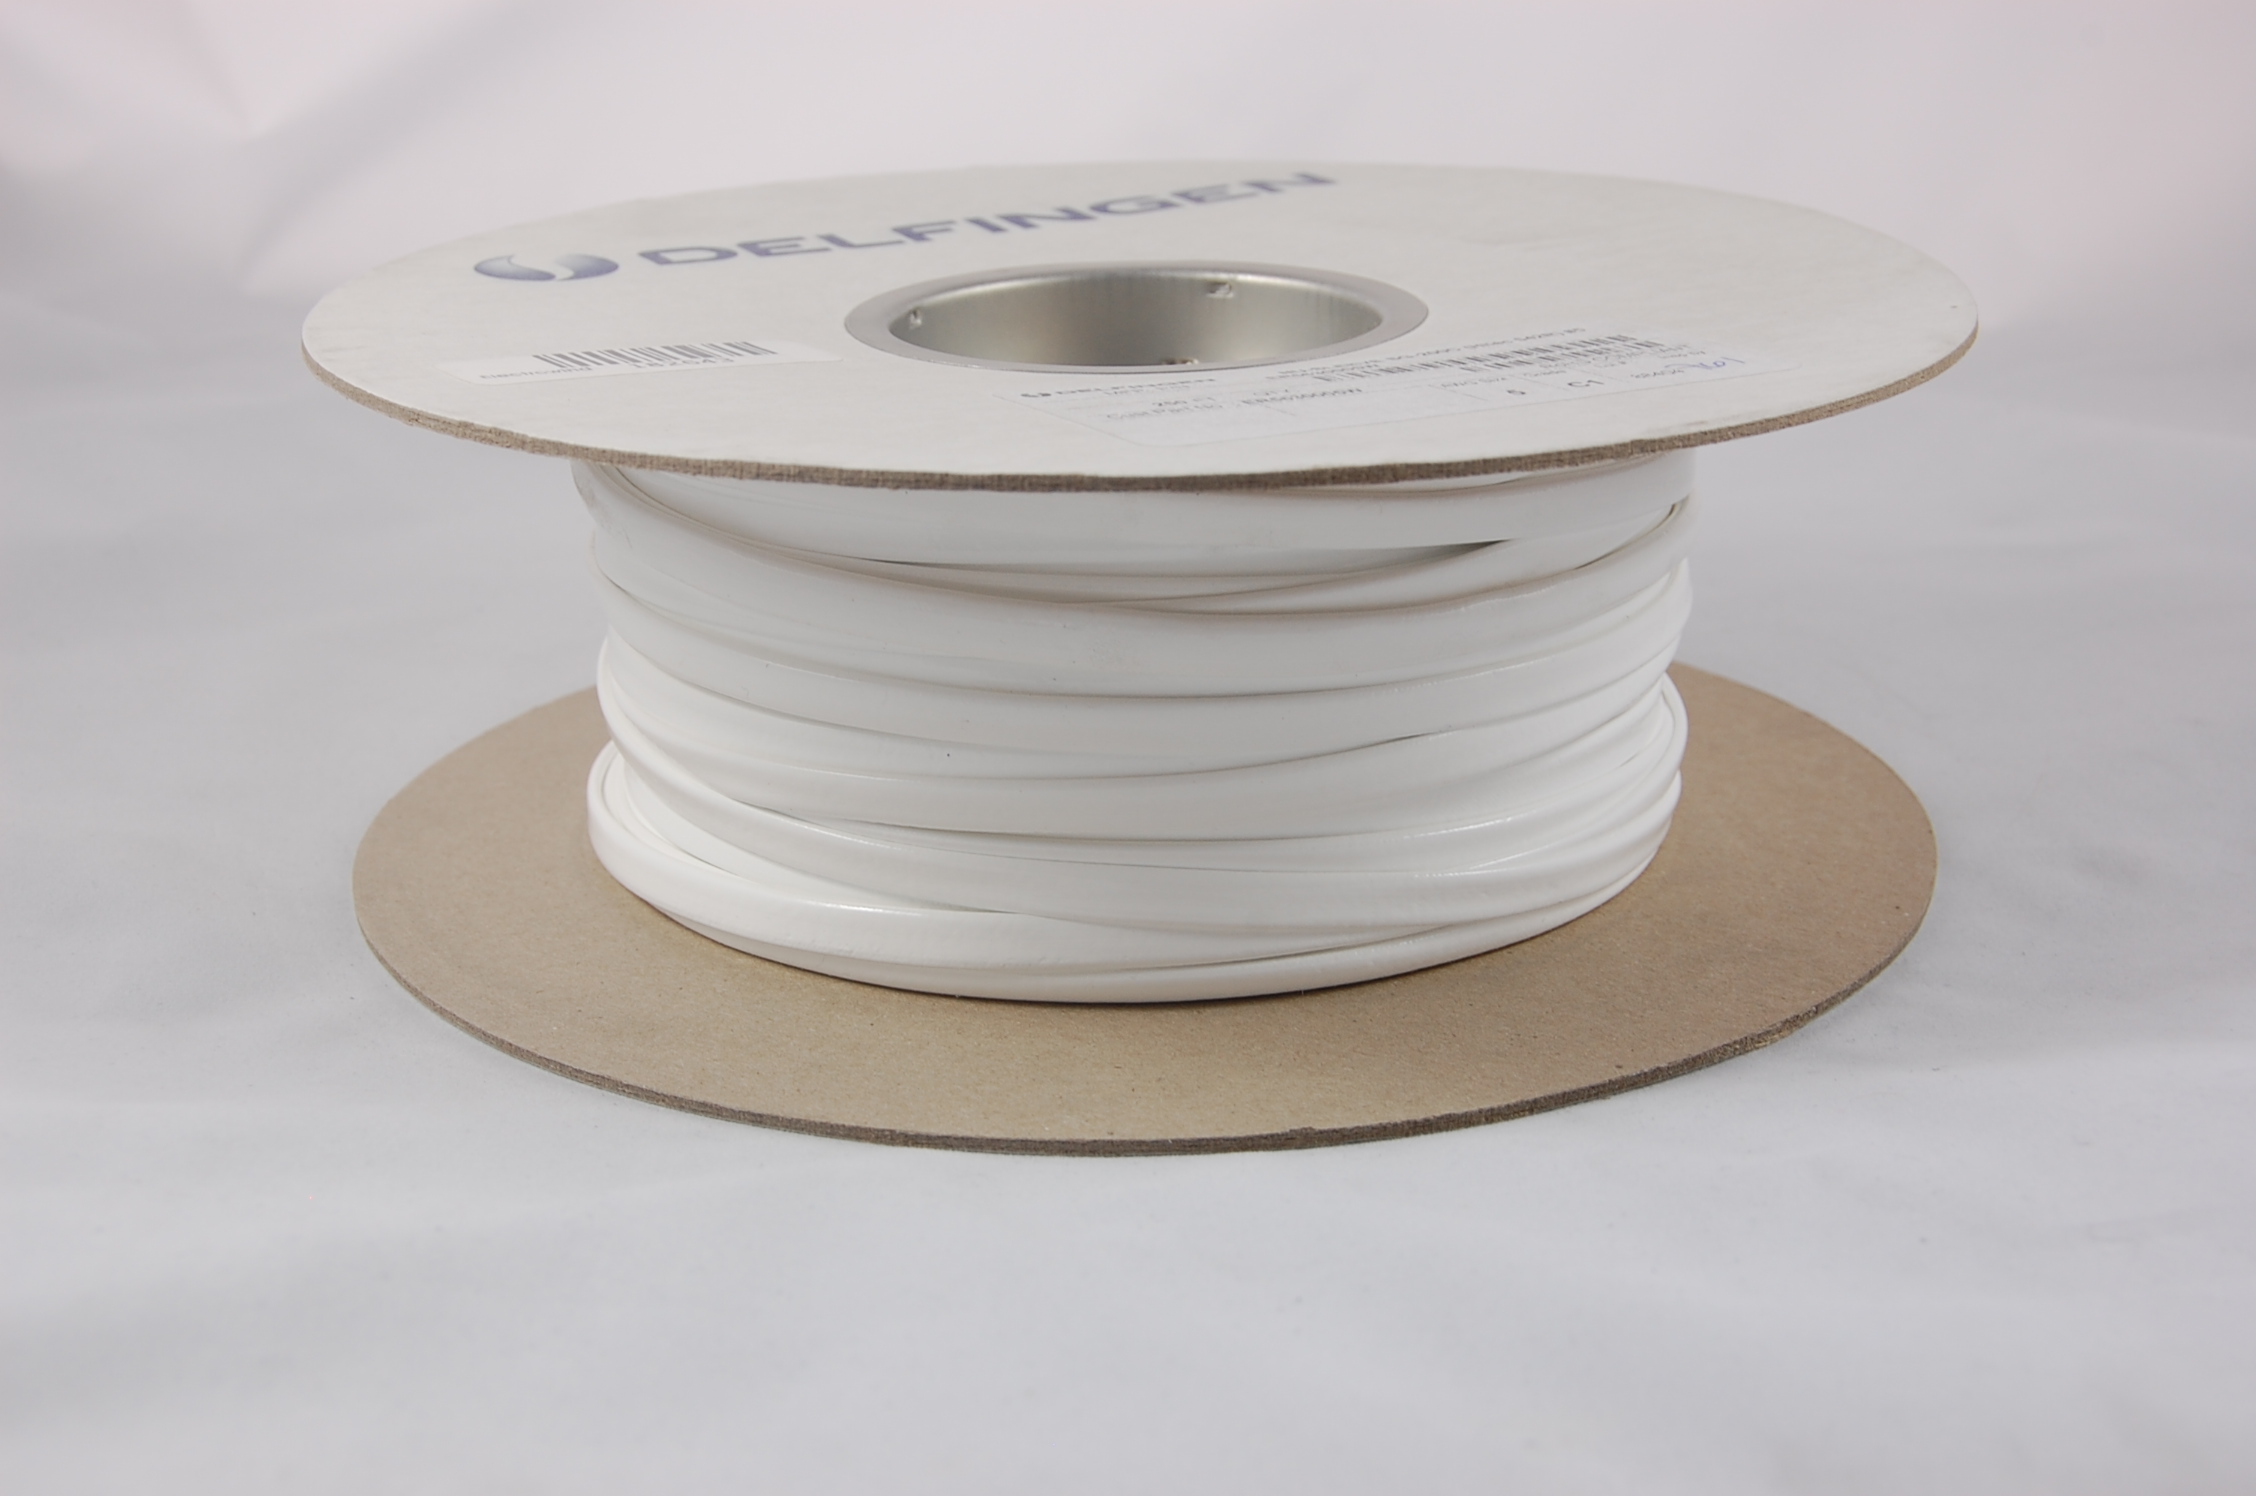 #1 AWG NU-SLEEVE SG-200 C-1 (2500V) Silicone Rubber Coated Braided Fiberglass Sleeving (542F) 200°C, white, 100 FT per spool